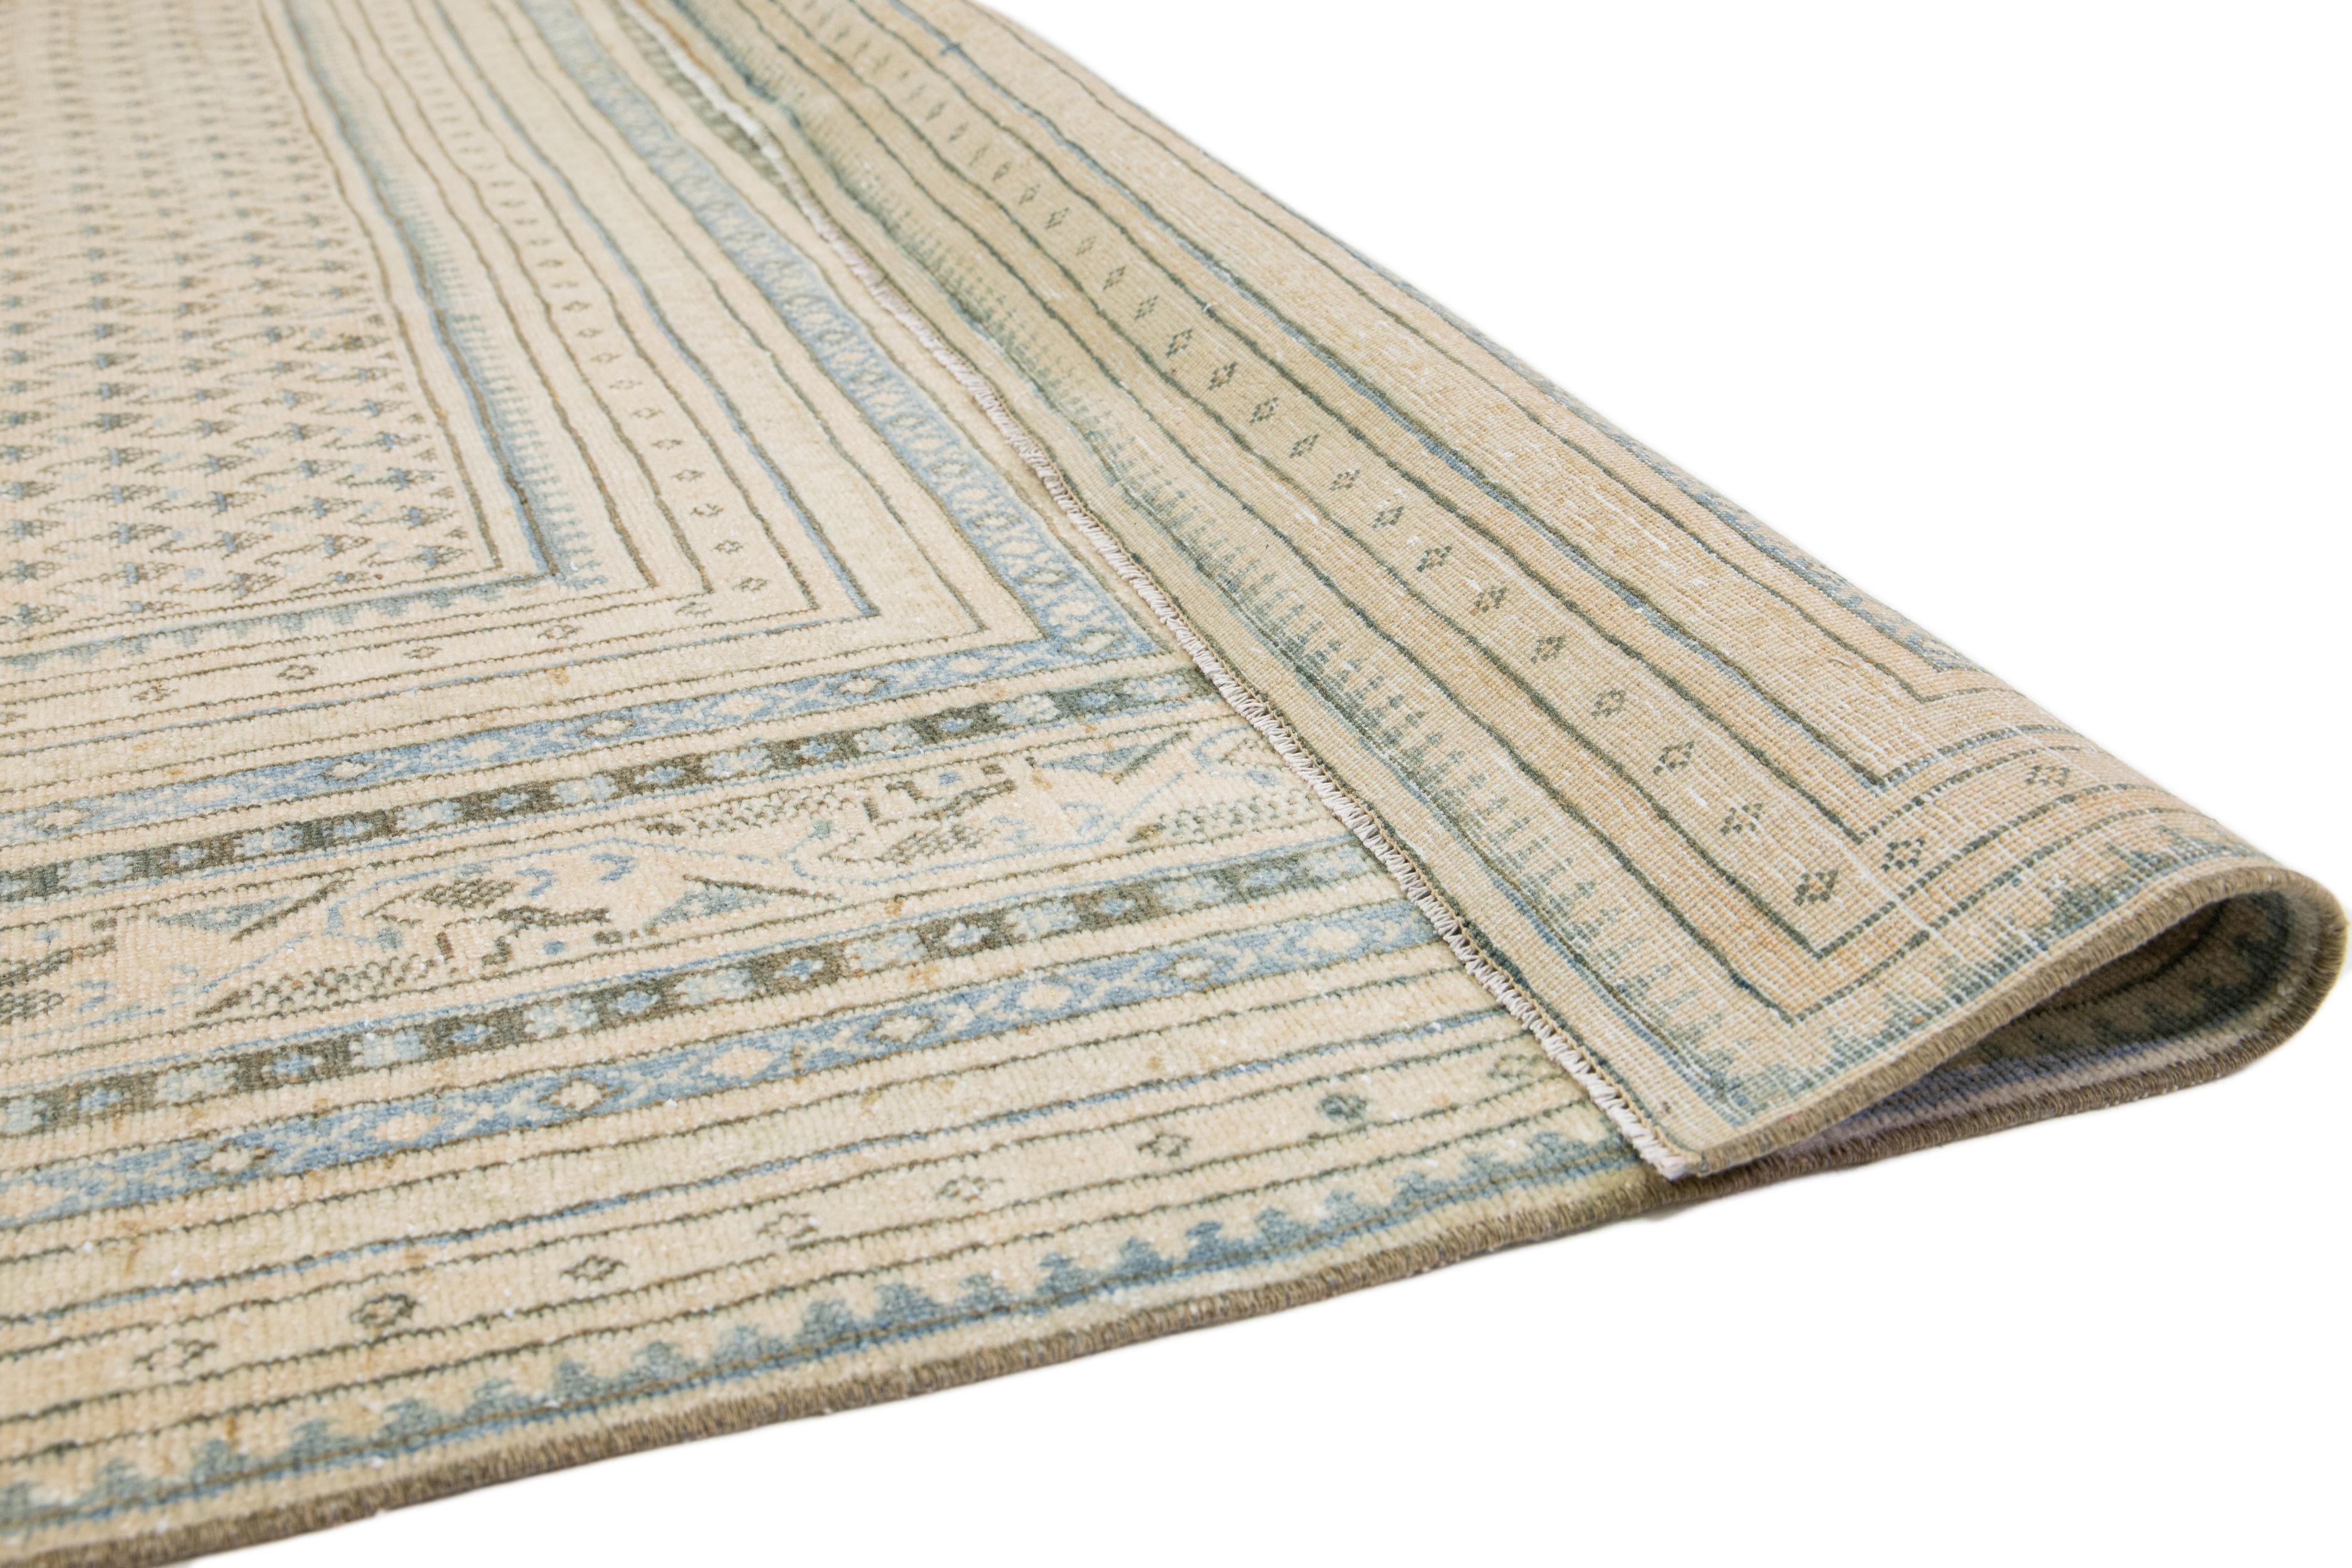 1900s Antique Persian Malayer Allover Wool Rug Handmade In Beige In Excellent Condition For Sale In Norwalk, CT